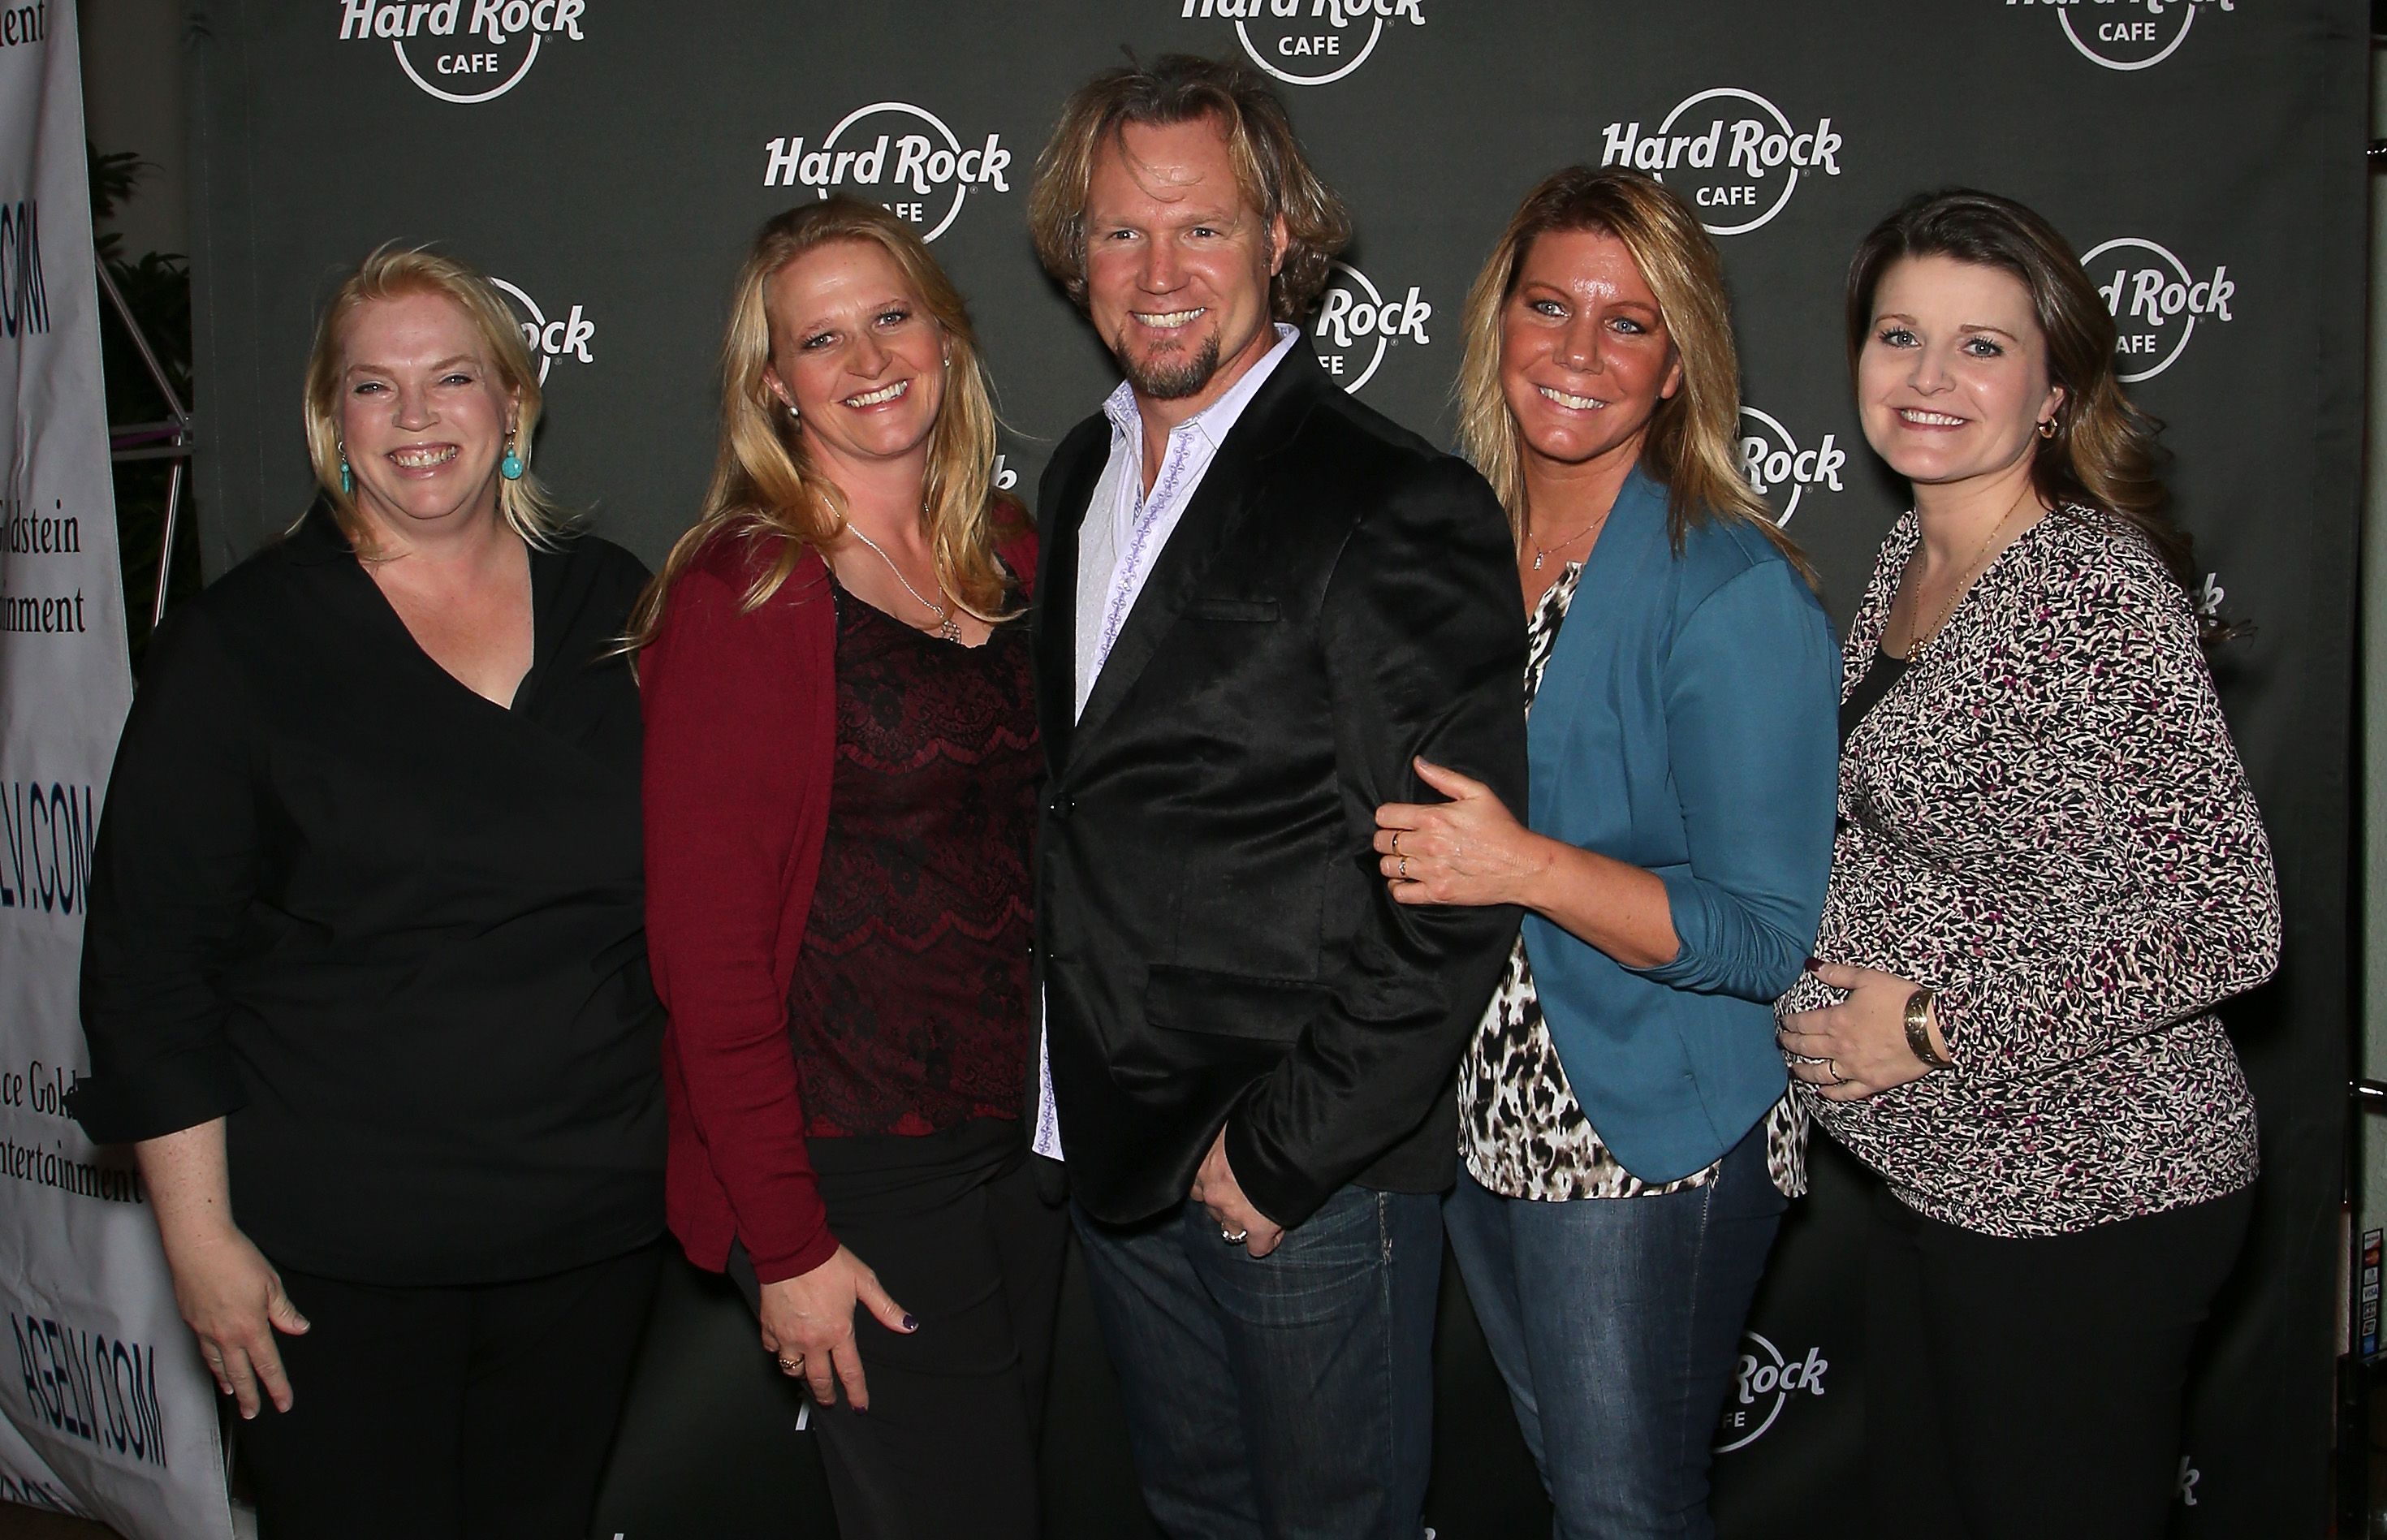 Kody Brown and his wives, Janelle Brown, Christine Brown, Meri Brown and Robyn Brown, at Hard Rock Cafe Las Vegas on October 10, 2015 | Getty Images